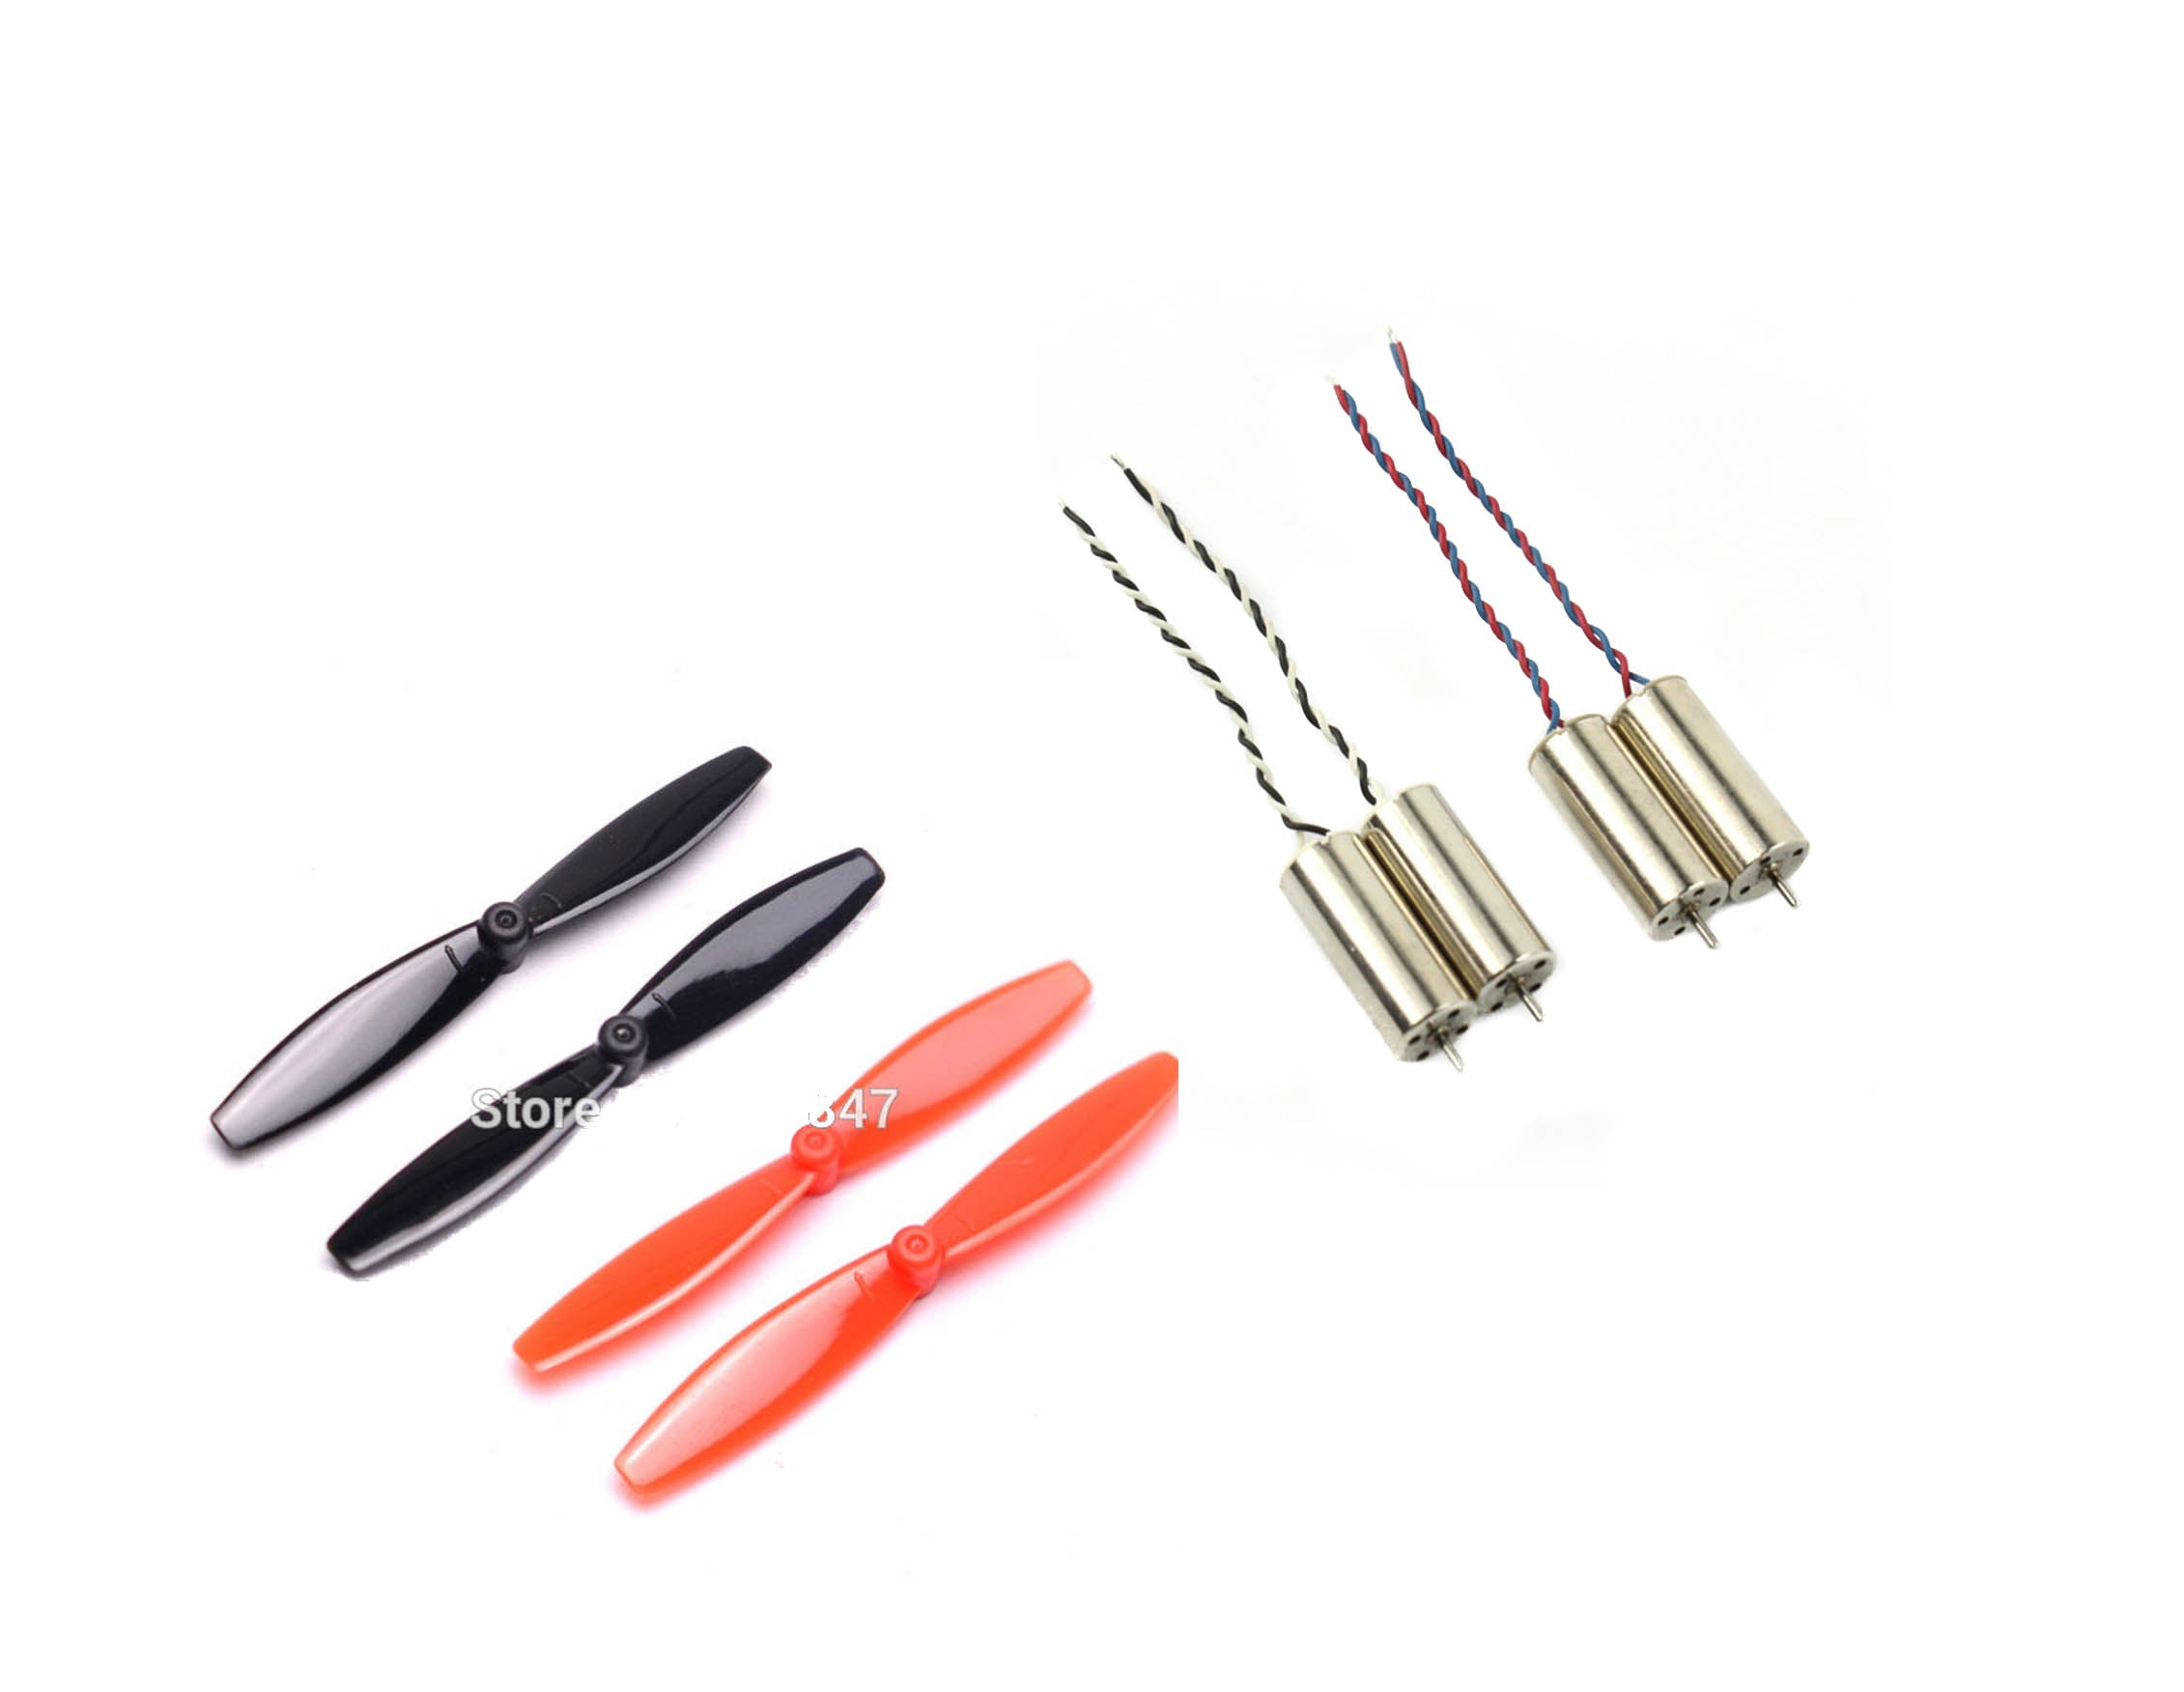 65mm Blade Propeller Prop with 8520 CW & CCW Coreless Brushed Motor For Indoor Racing Drone Quad-copter